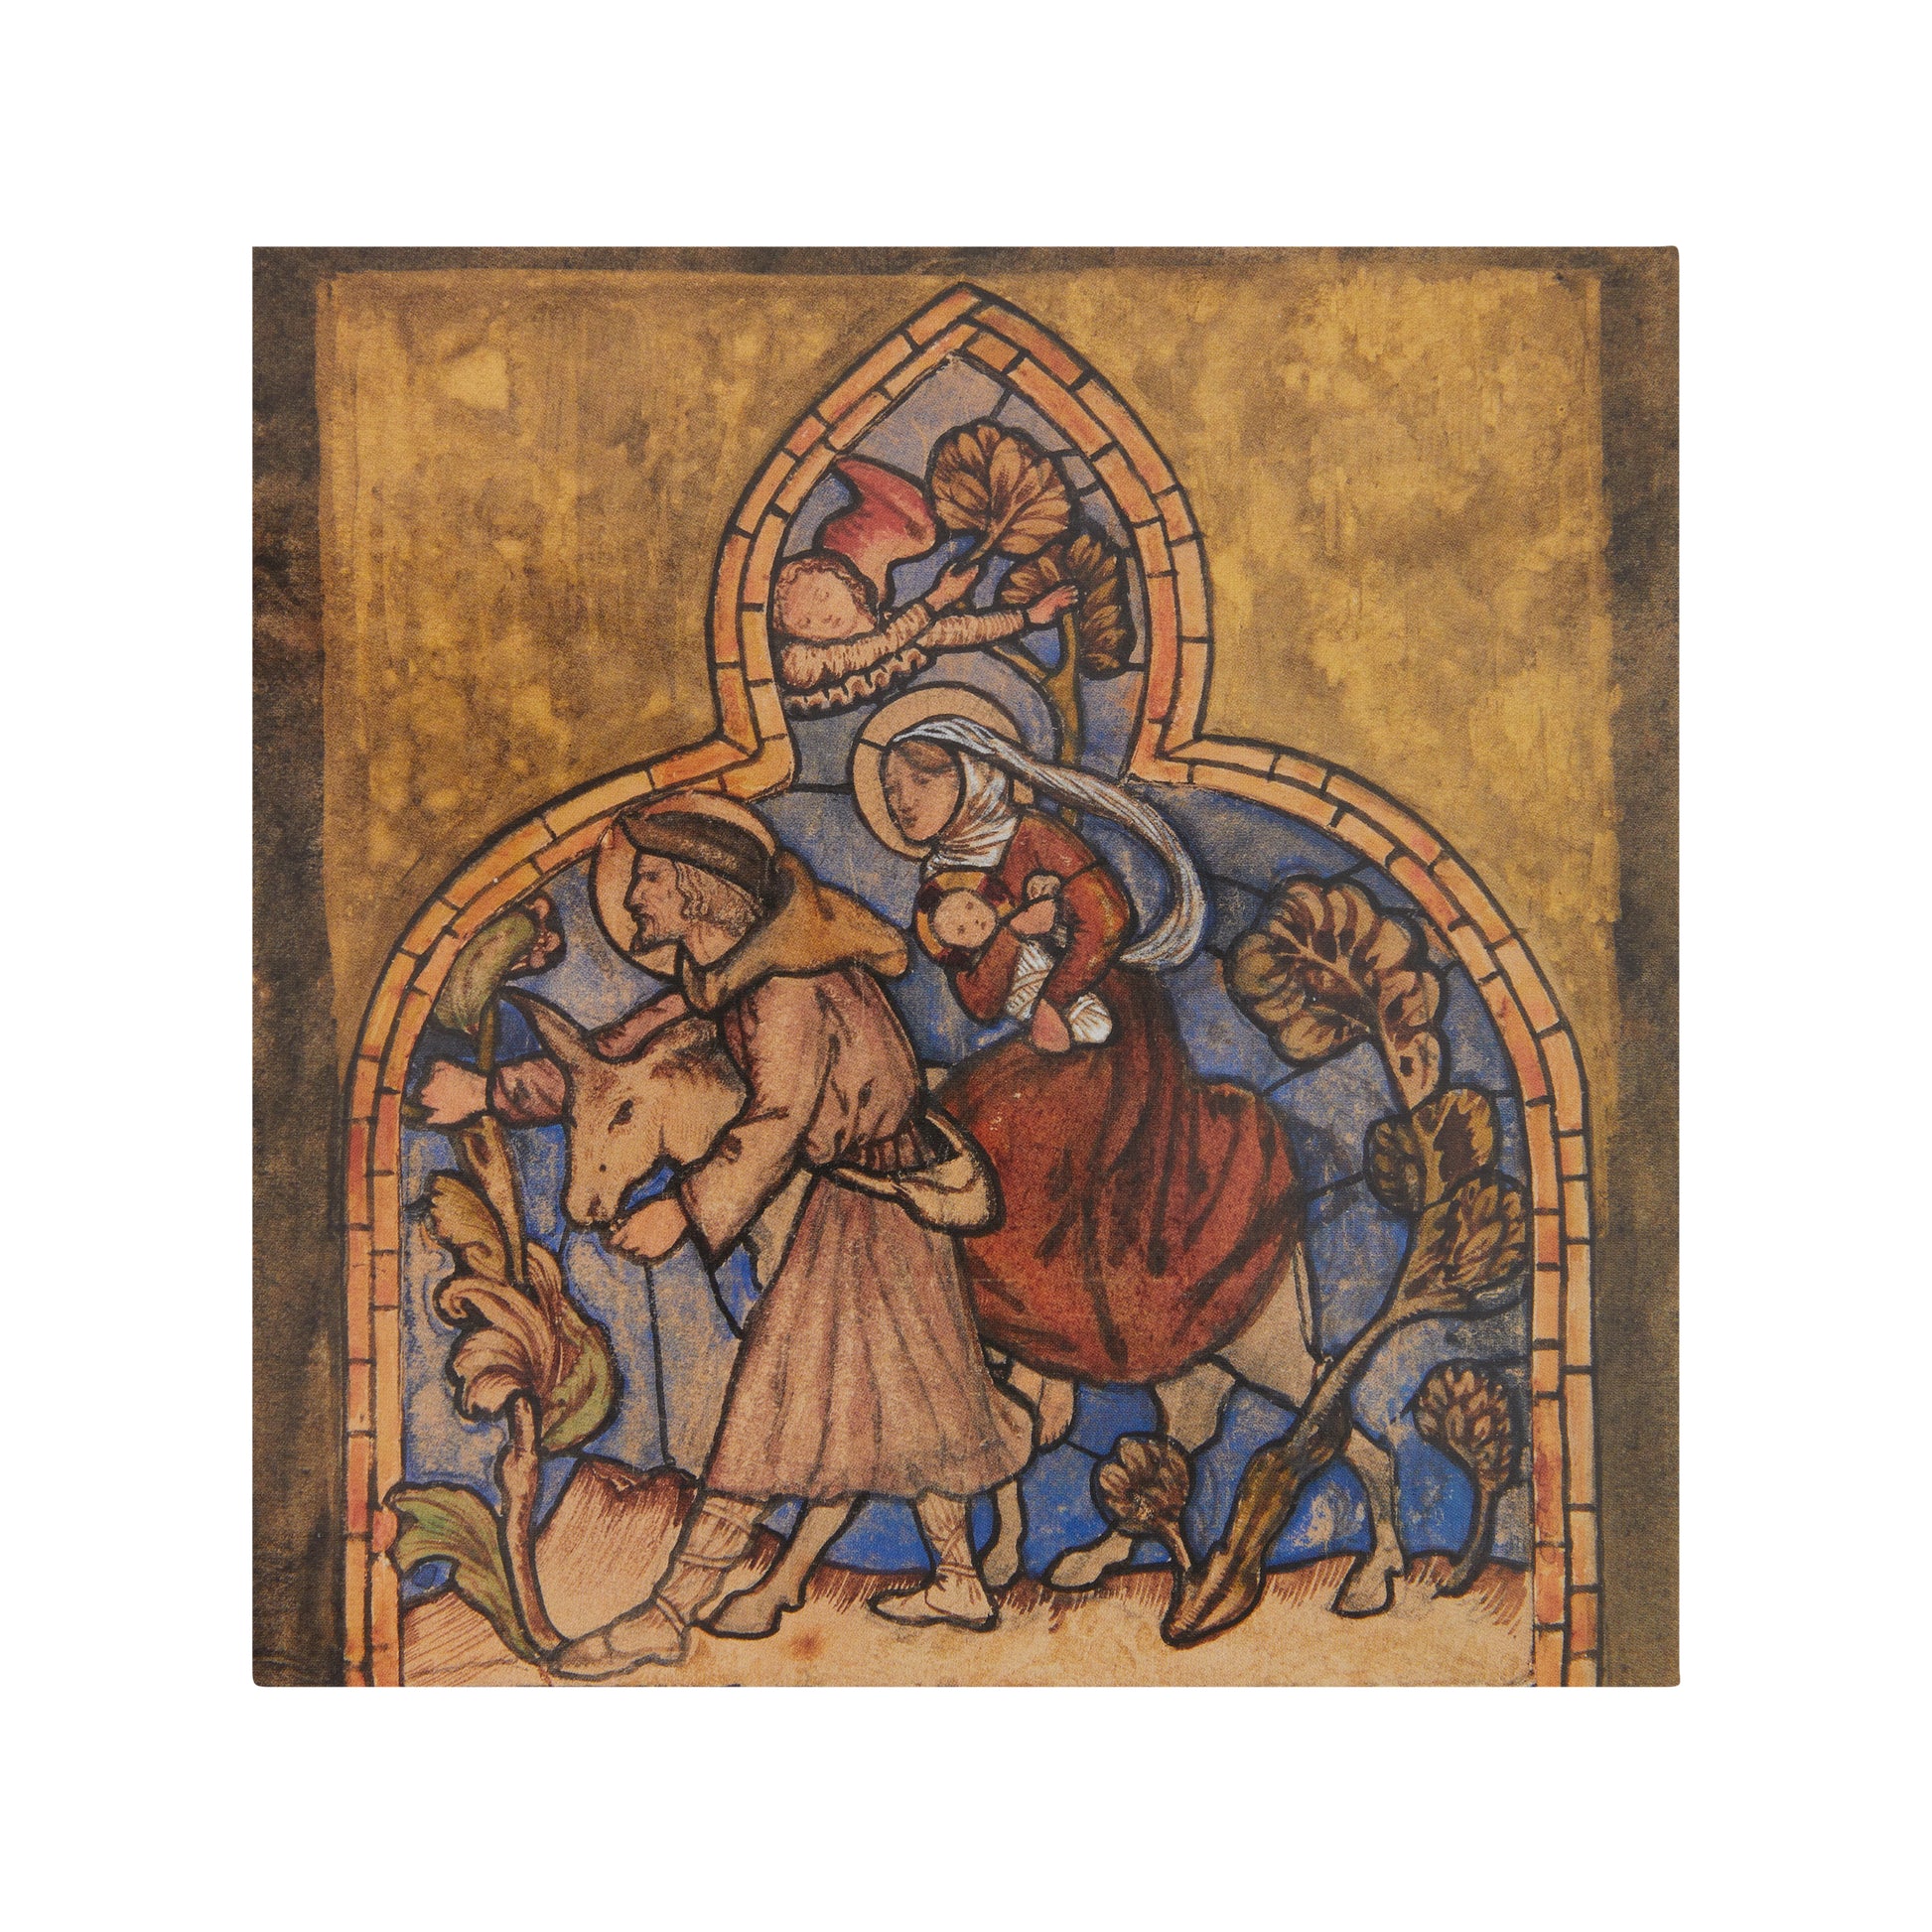 Large square Christmas card, the holy family within stained glass window design. Gold surround. By Edward Burne-Jones. From the collection of The Fitzwilliam Museum.